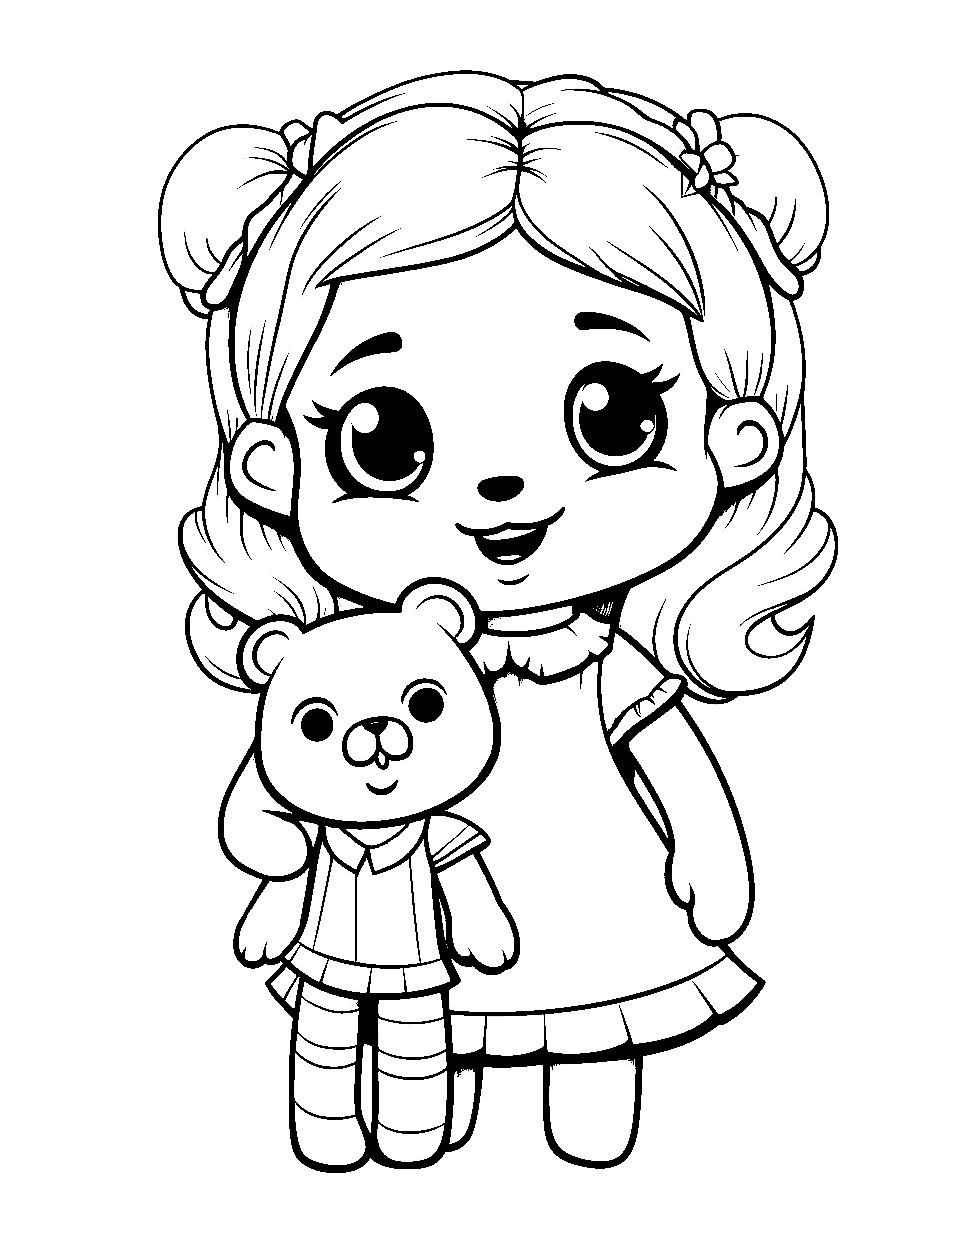 Plush Companion Coloring Page - A human-looking character with a cute plush companion.